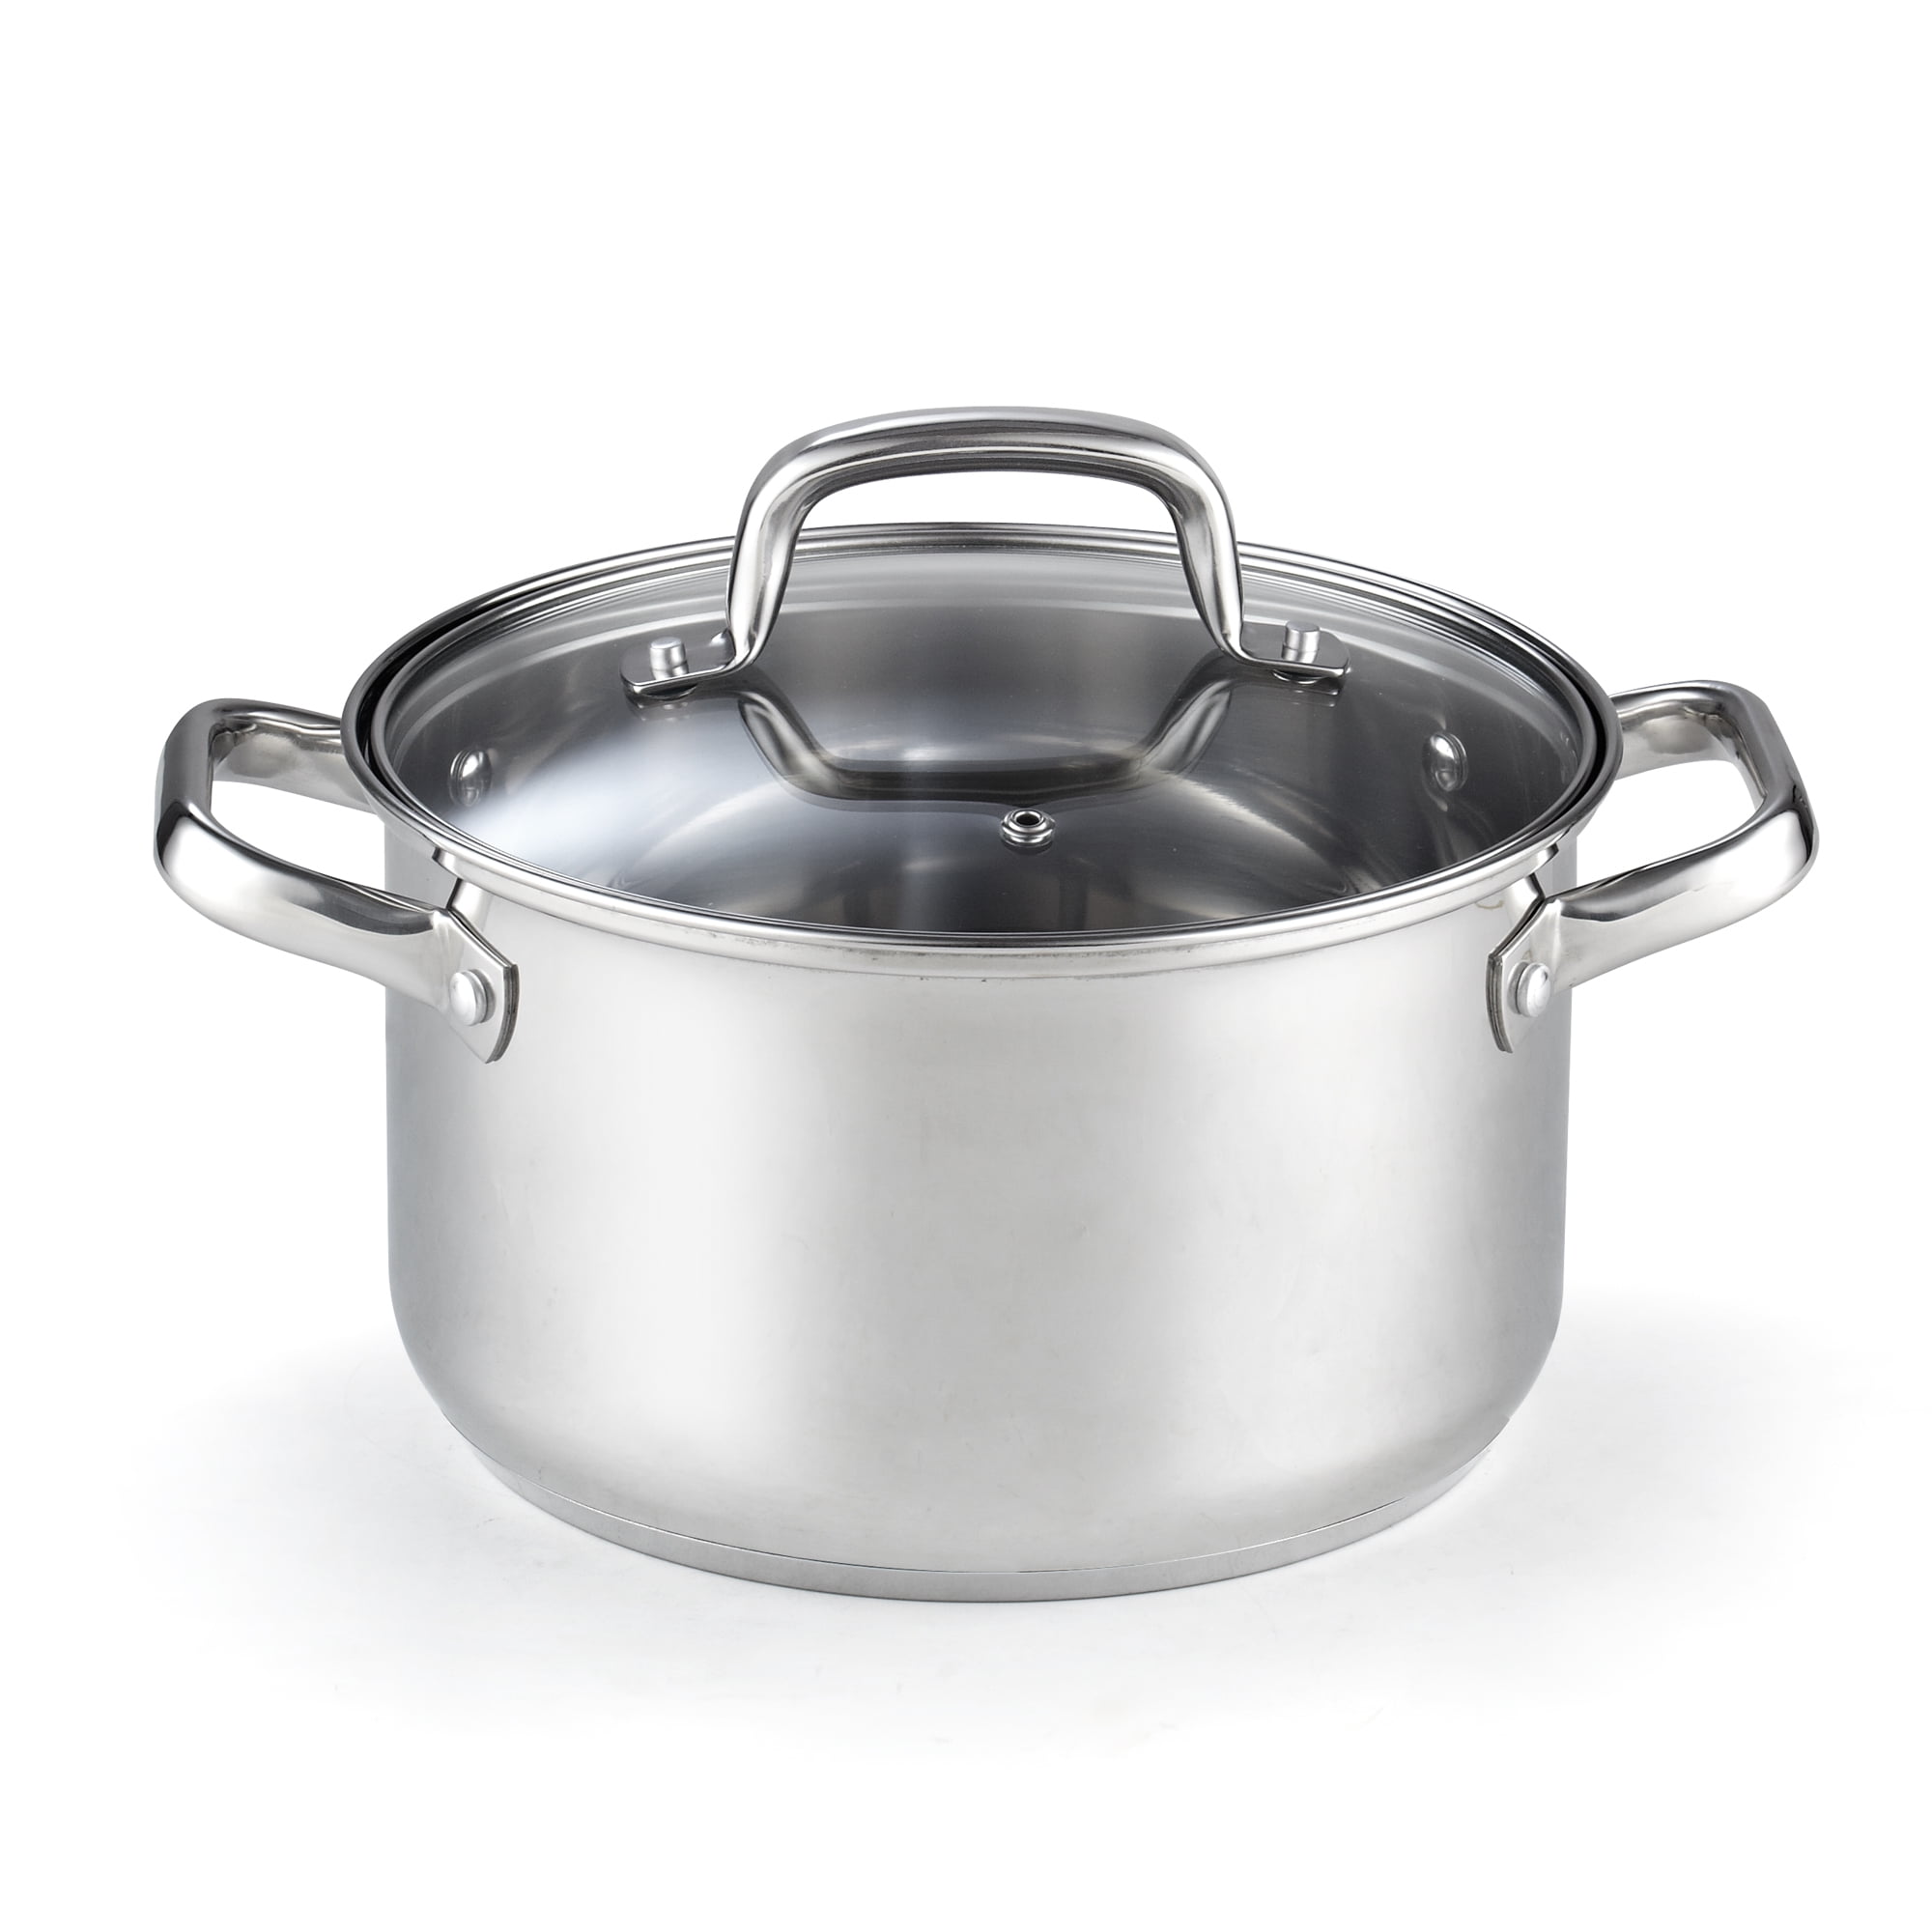 Cook N Home 02418 Stainless Steel Lid 5-Quart Stockpot 5-Qt Silver Renewed 